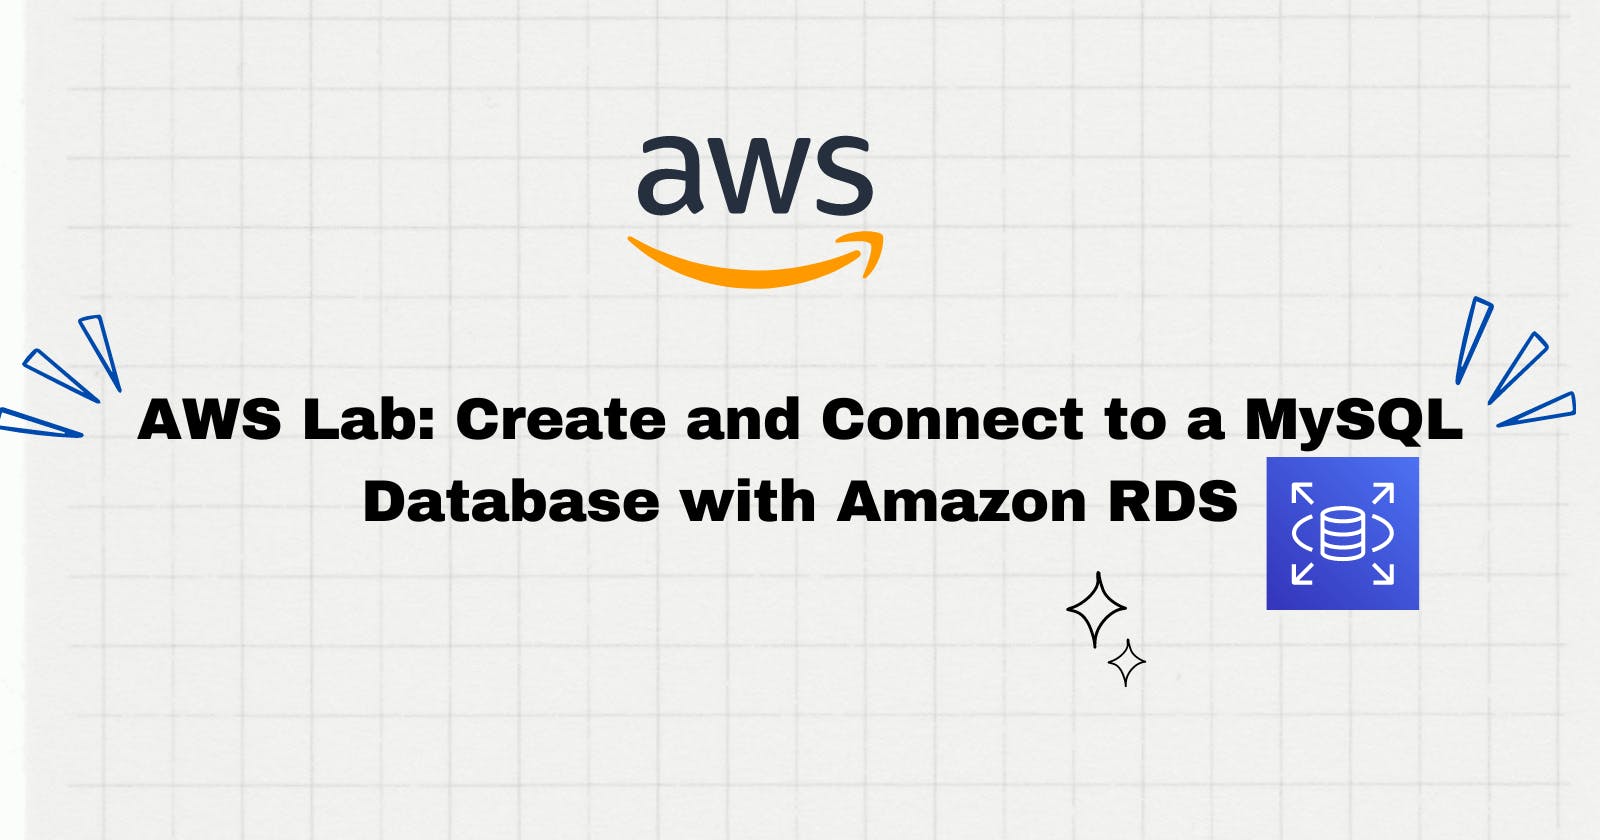 AWS Lab: Create and Connect to a MySQL Database with Amazon RDS